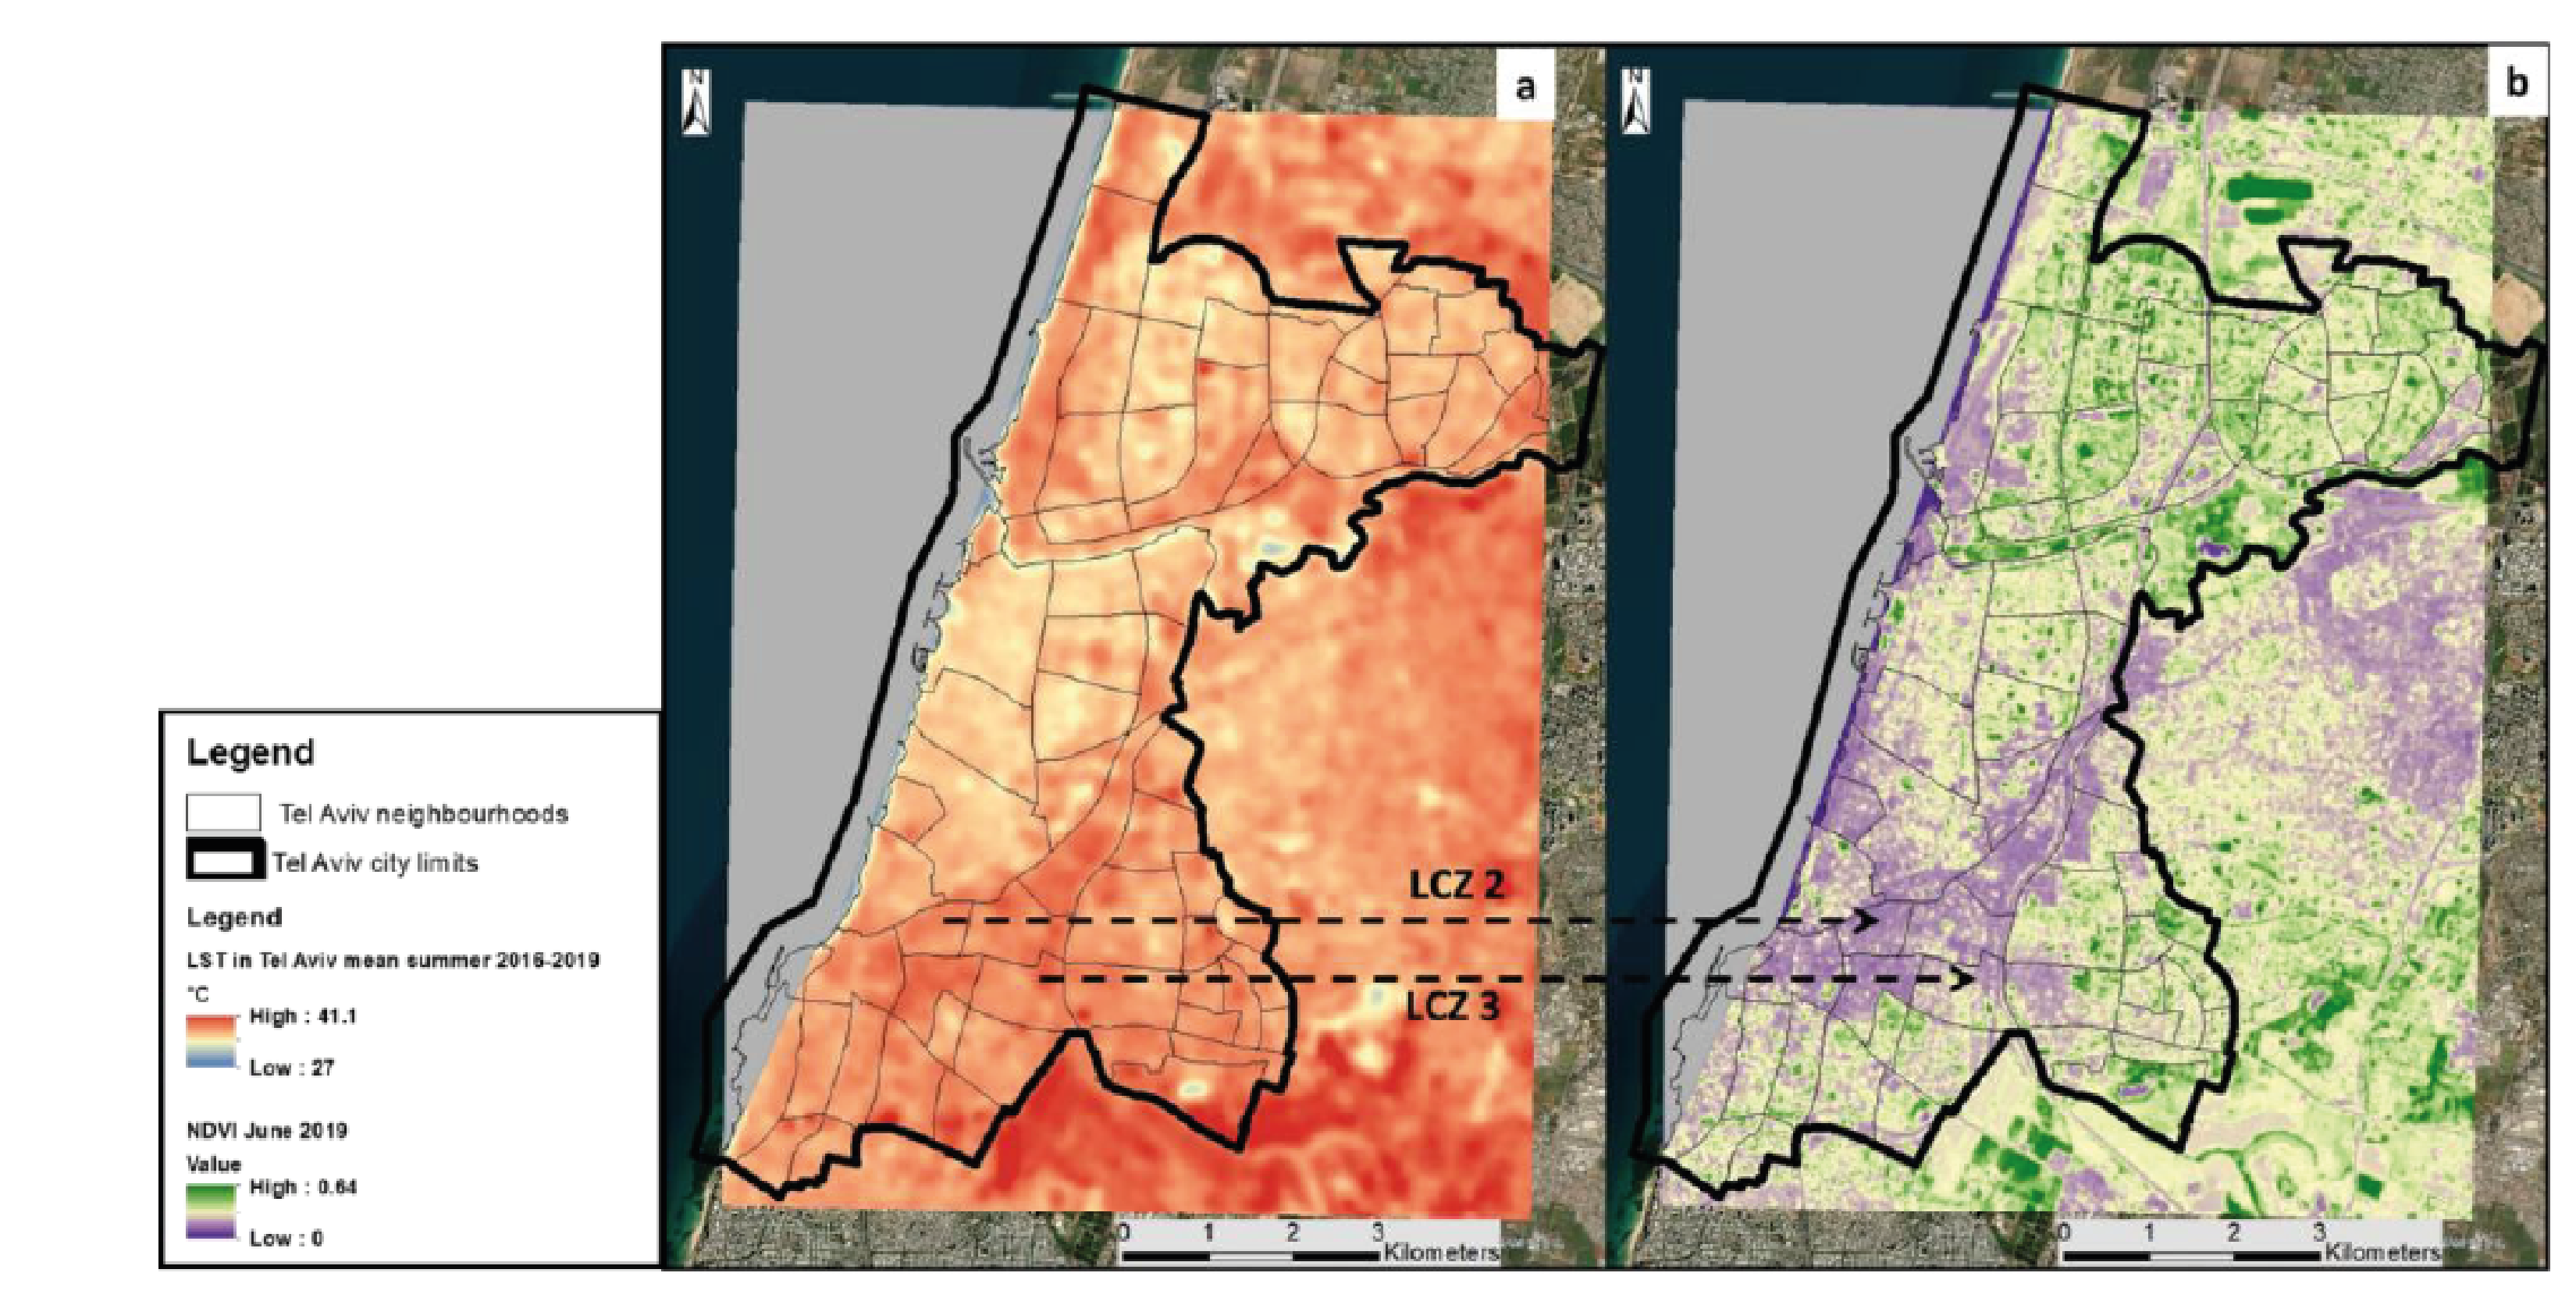 Remote sensing for urban microclimate analytics
